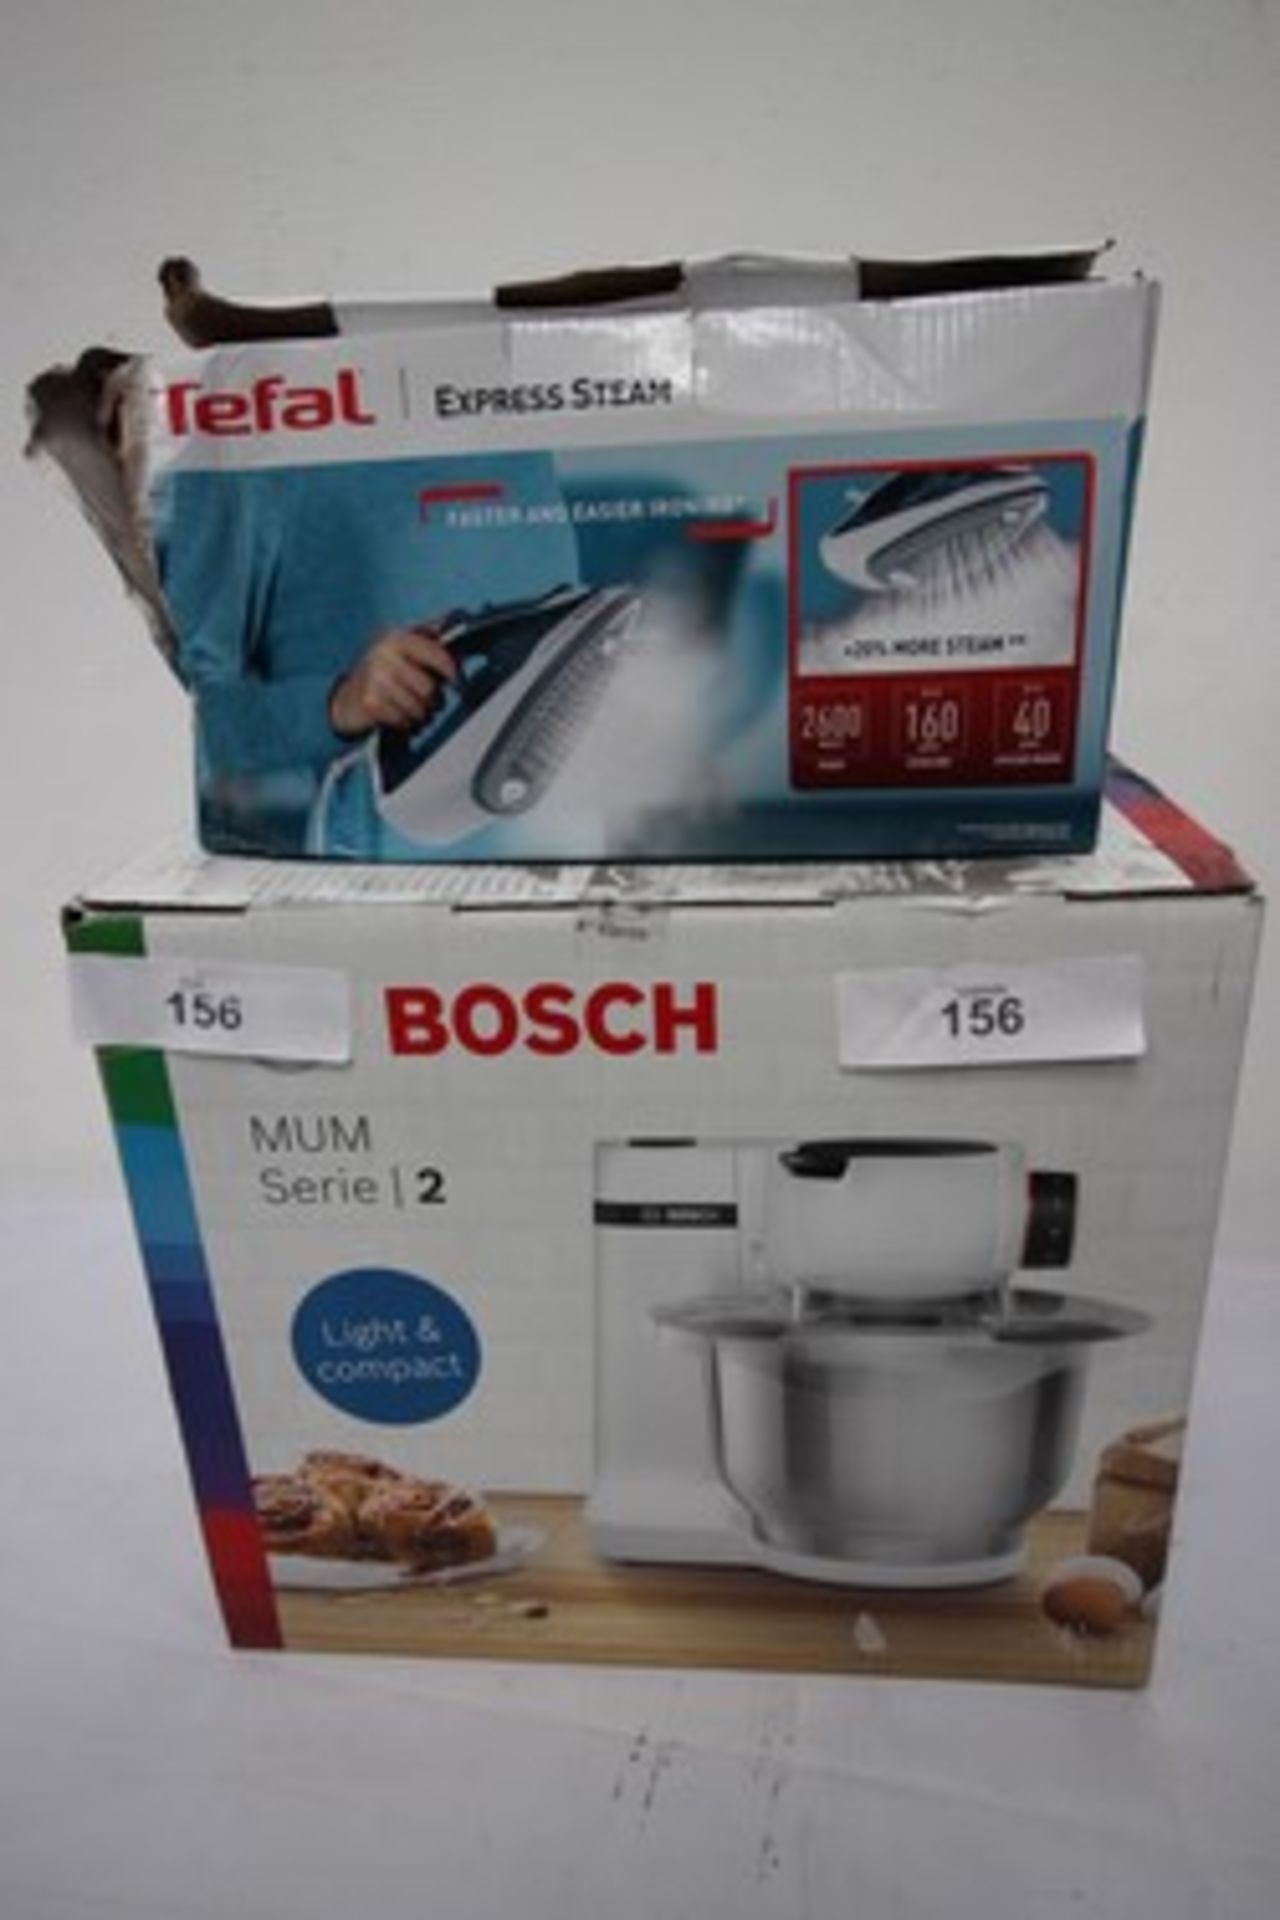 1 x Bosch Mum Serie 2 compact food processor, Model MUMS2EWOOG, together with 1 x Tefal steam iron